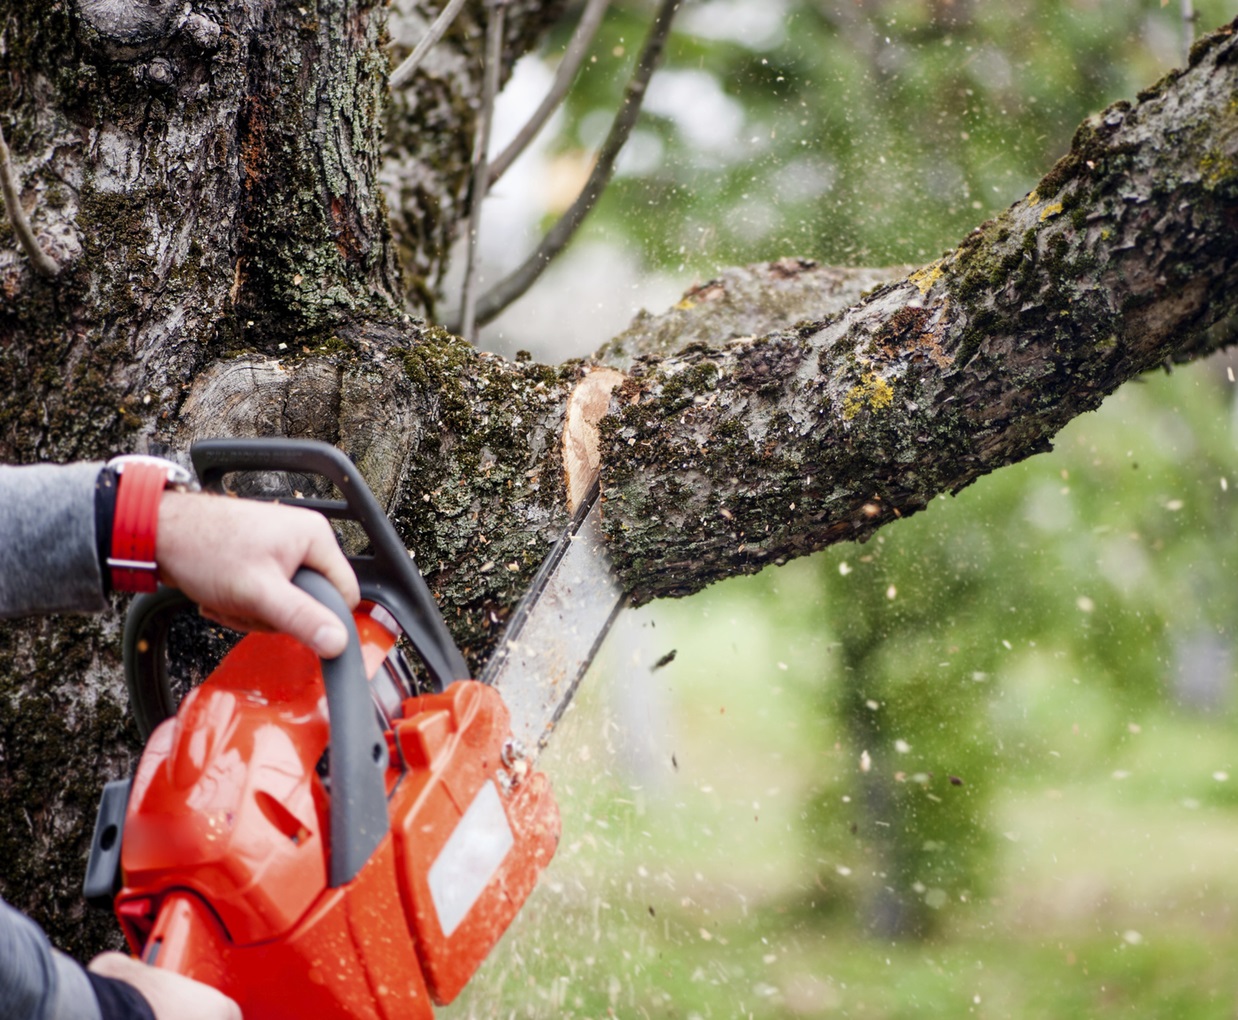 9 Questions You Should Ask Before Hiring a Tree Service Company